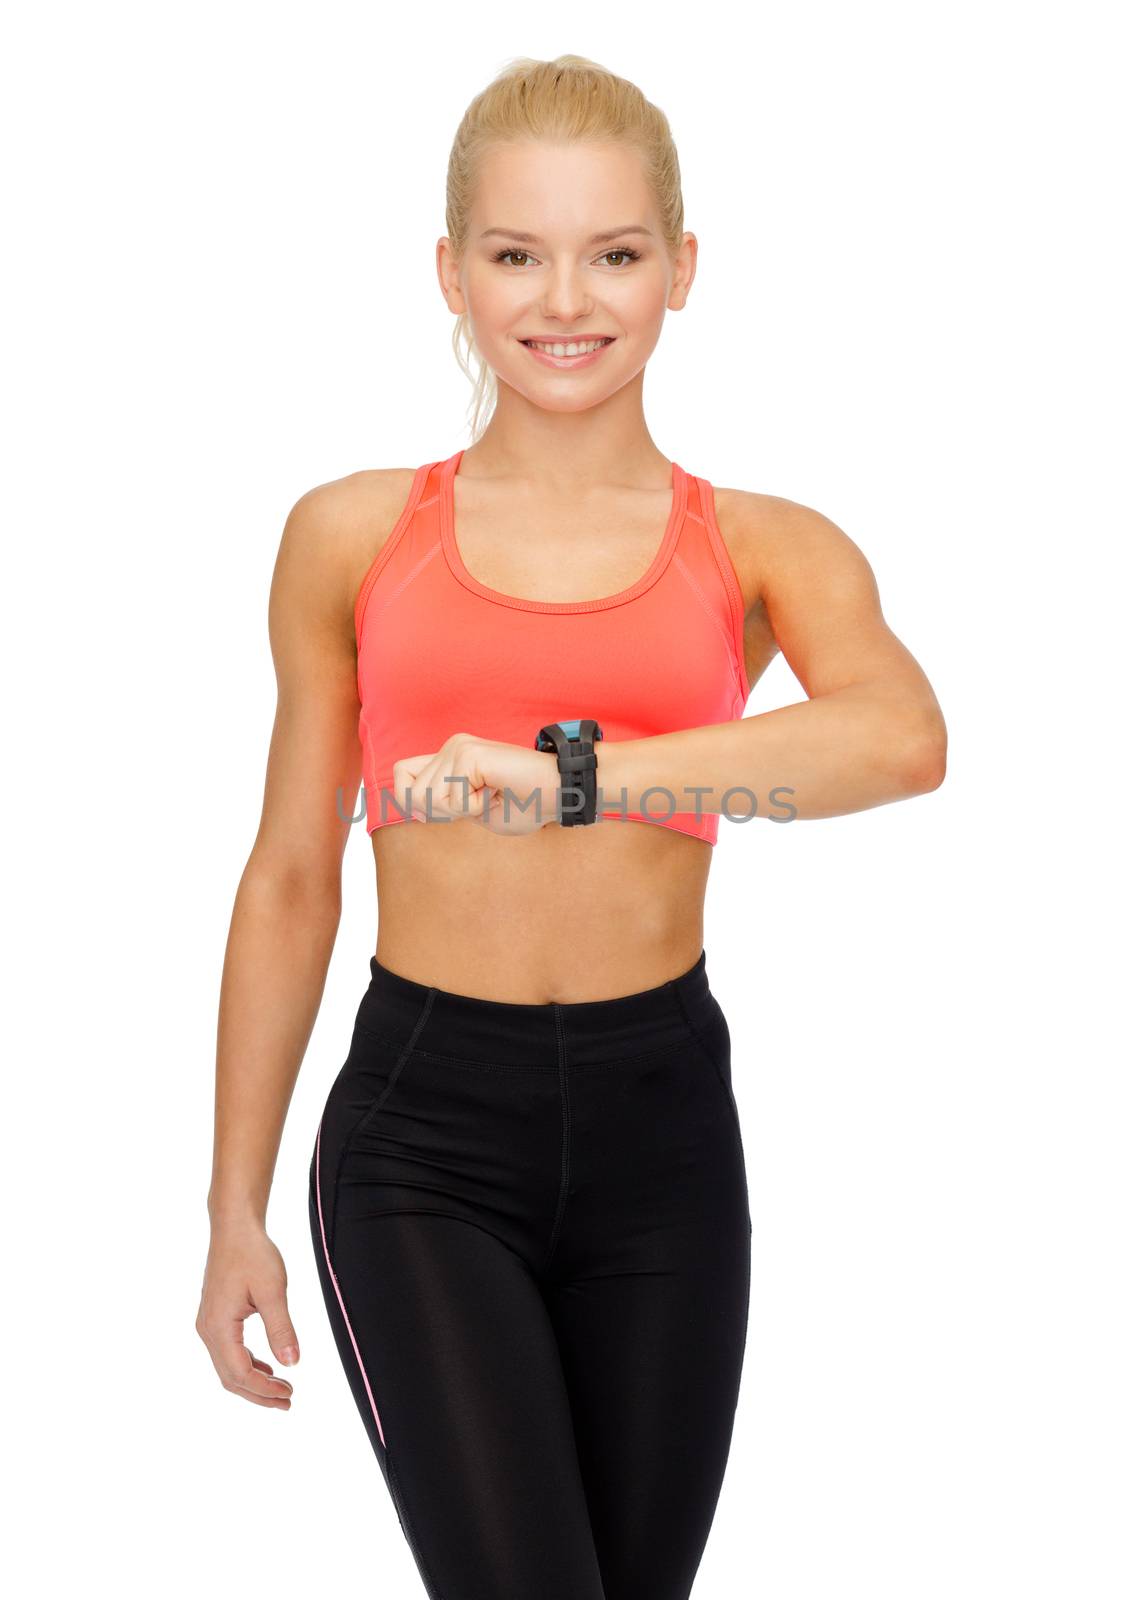 smiling woman with heart rate monitor on hand by dolgachov